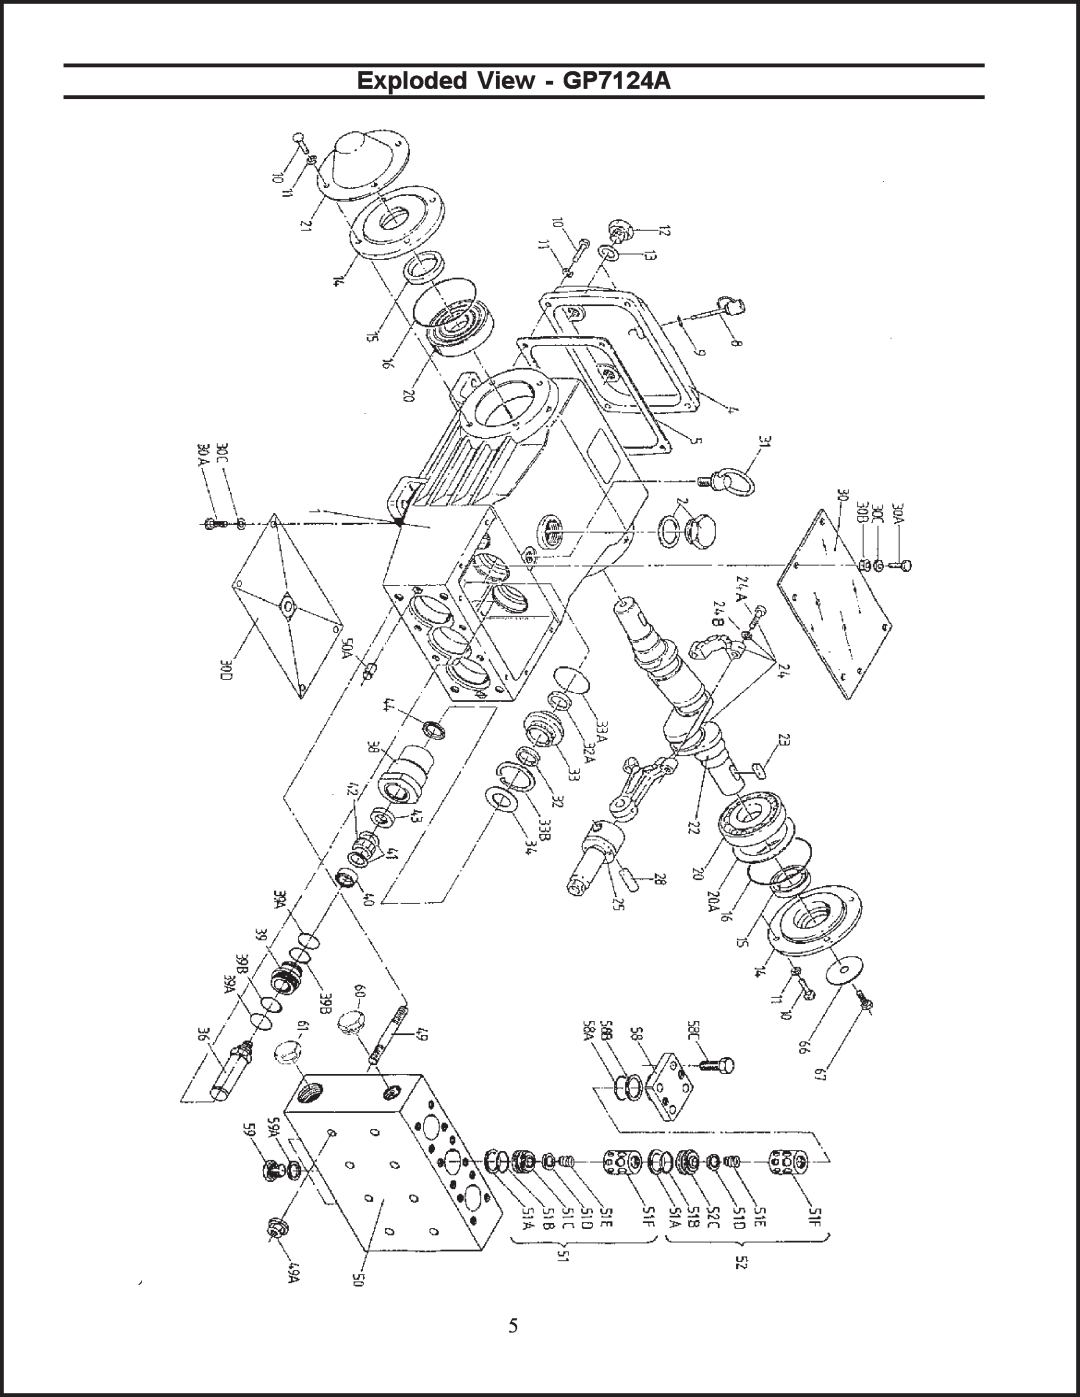 Giant installation instructions Exploded View - GP7124A 